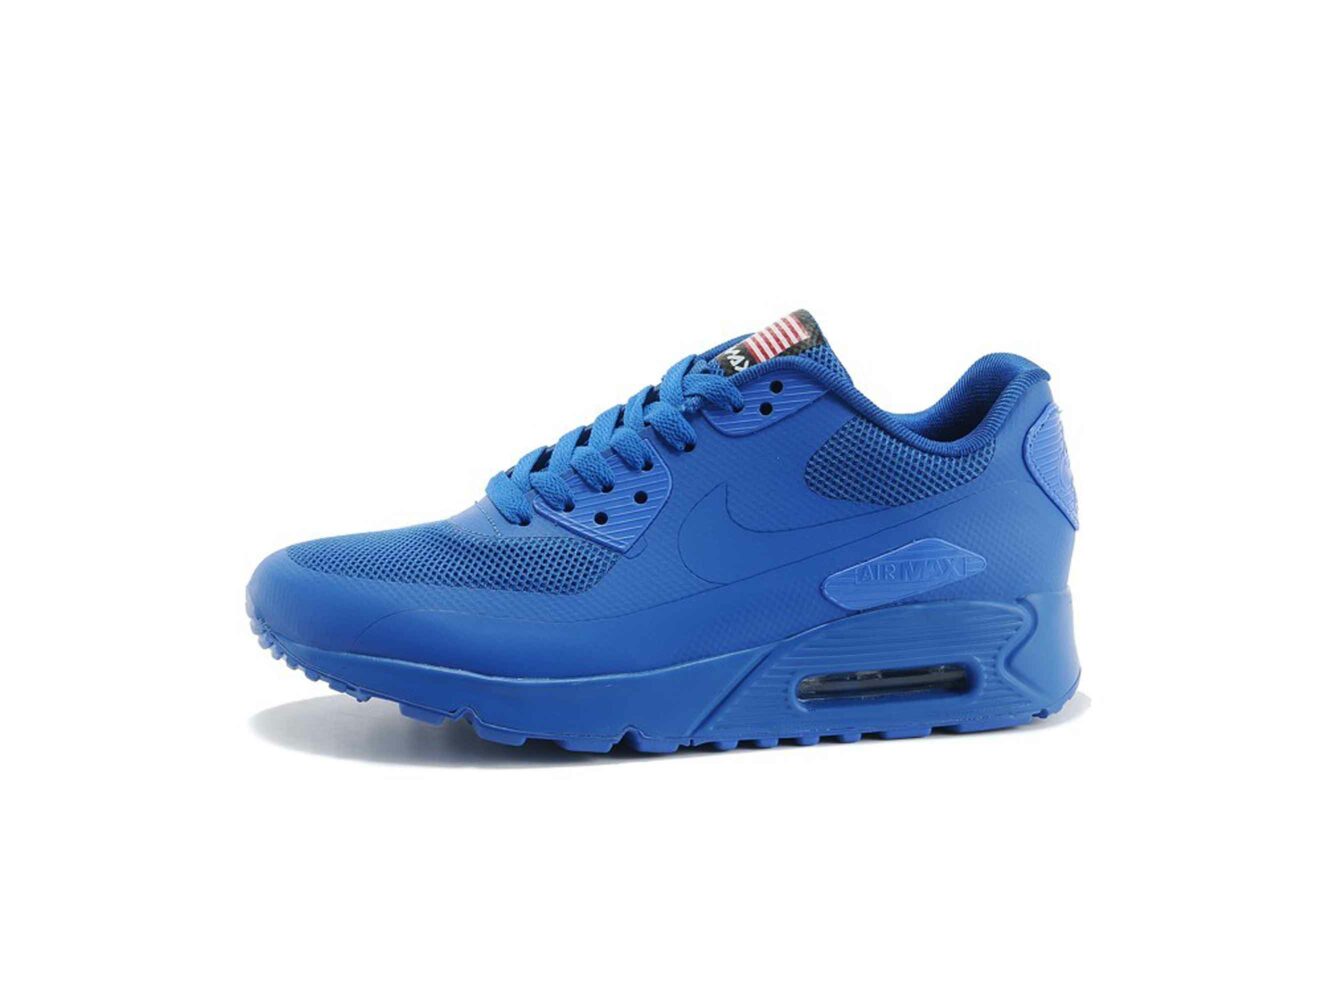 Nike Air Max 90 Hyperfuse Independence Day 2013 Blue Купить